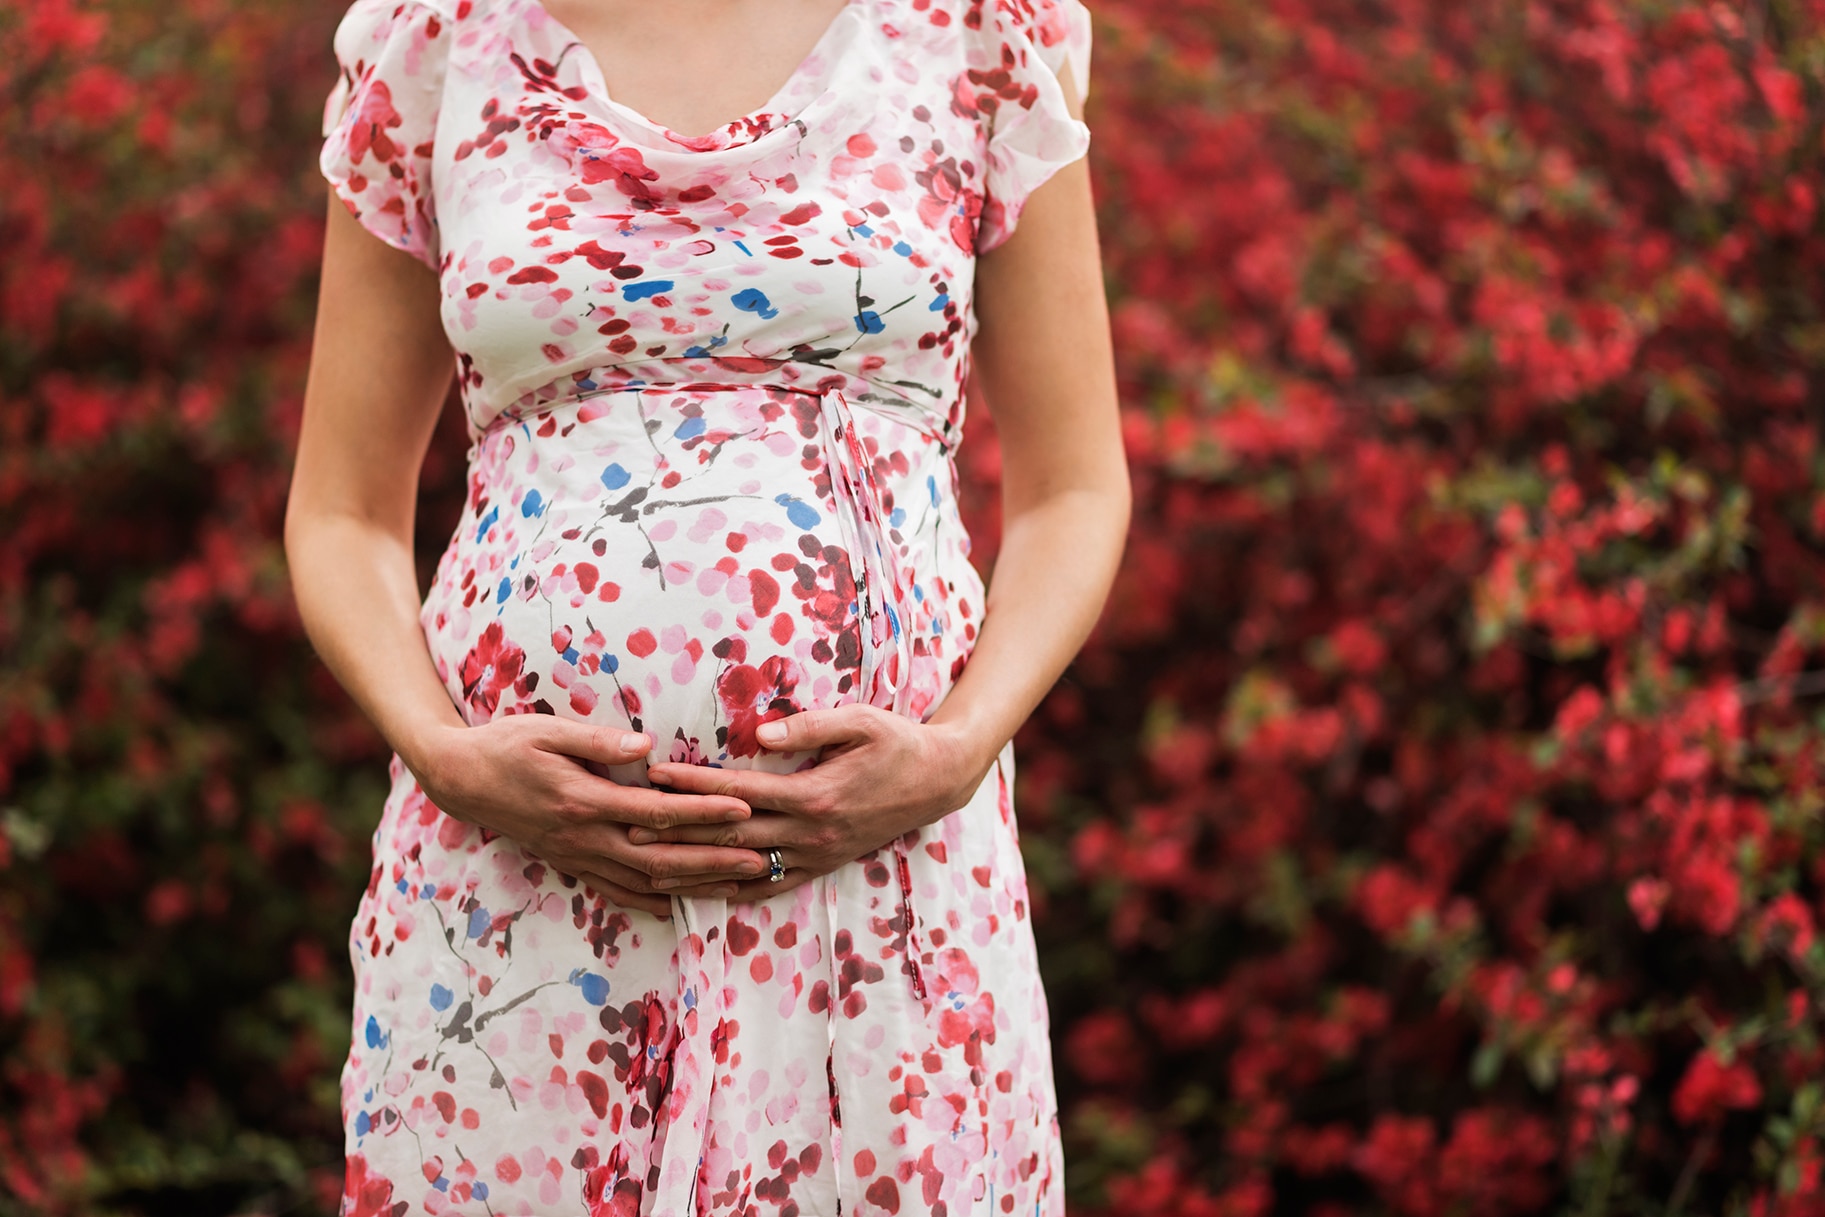 During pregnancy, so many fears can creep up on a mama-to-be — including a ...